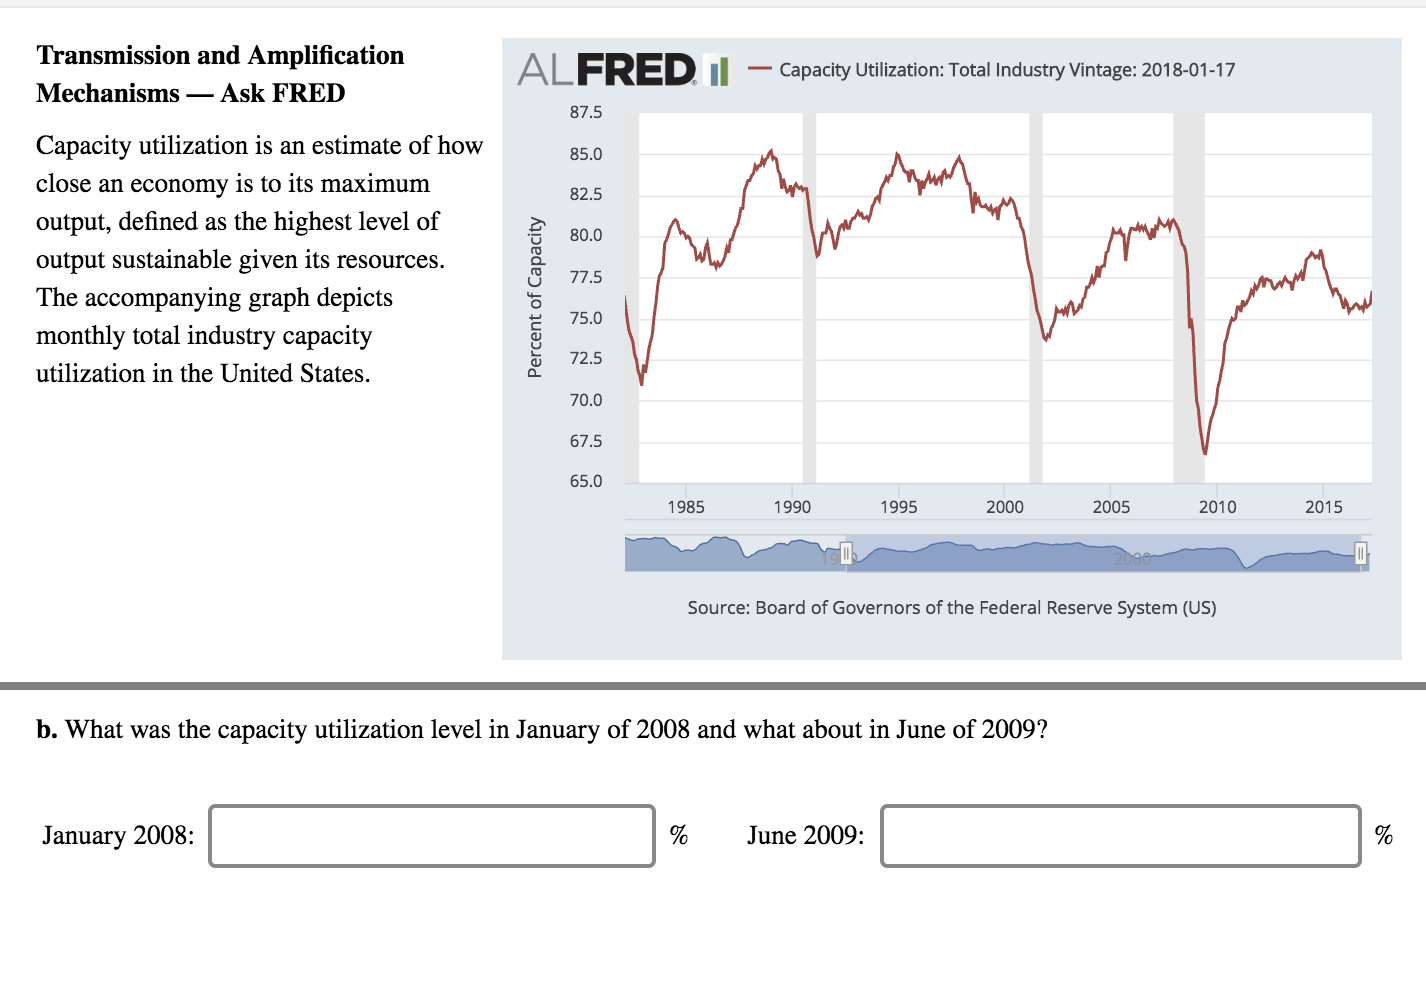 Transmission and Amplification
Mechanisms-Ask FRED
ALFREDi
-capacity utilization: Total Industry Vintage: 2018-01-17
7
87.5
85.0
82.5
80.0
Capacity utilization is an estimate of how
close an economy is to its maximum
output, defined as the highest level of
output sustainable given its resources.
The accompanying graph depicts
monthly total industry capacity
utilization in the United States.
75.0
a 72.5
70.0
67.5
65.0
1985
1990
1995
2000
2005
2010
2015
Source: Board of Governors of the Federal Reserve System (US)
b. What was the capacity utilization level in January of 2008 and what about in June of 2009?
January 2008:
%
June 2009:
